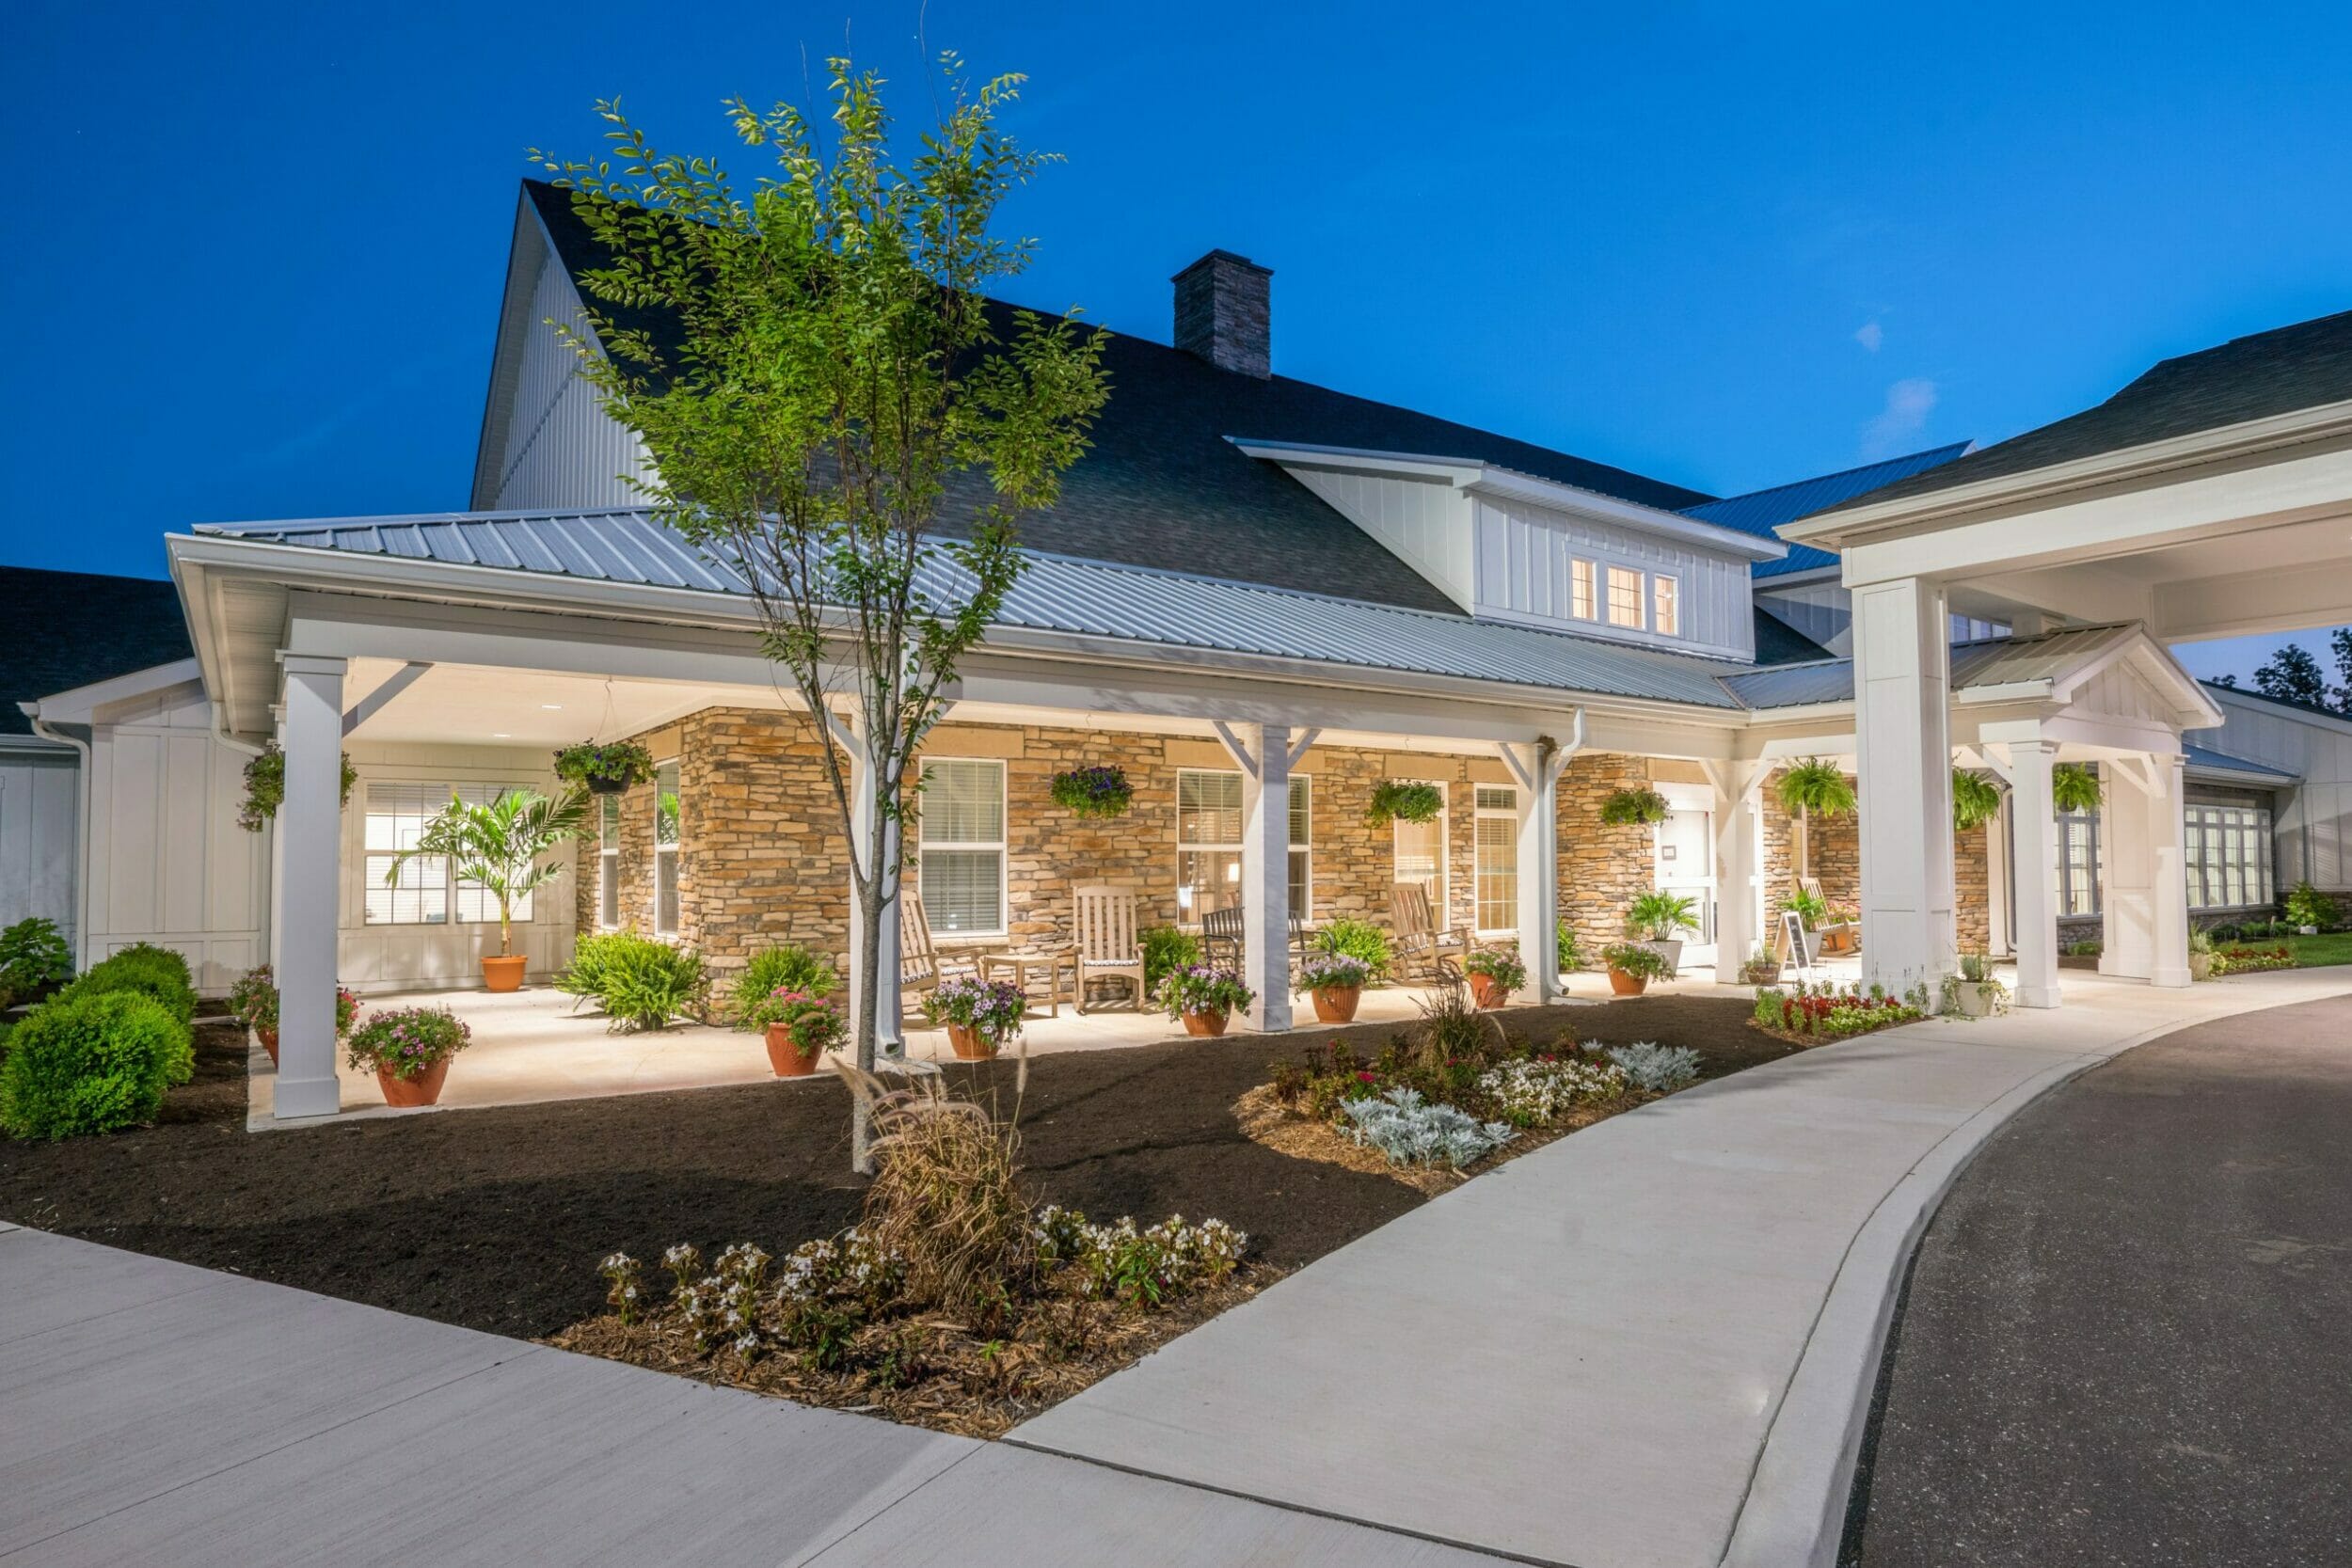 Exterior view of Demaree Crossing senior living at dusk with lit outdoor patio and porte corchere